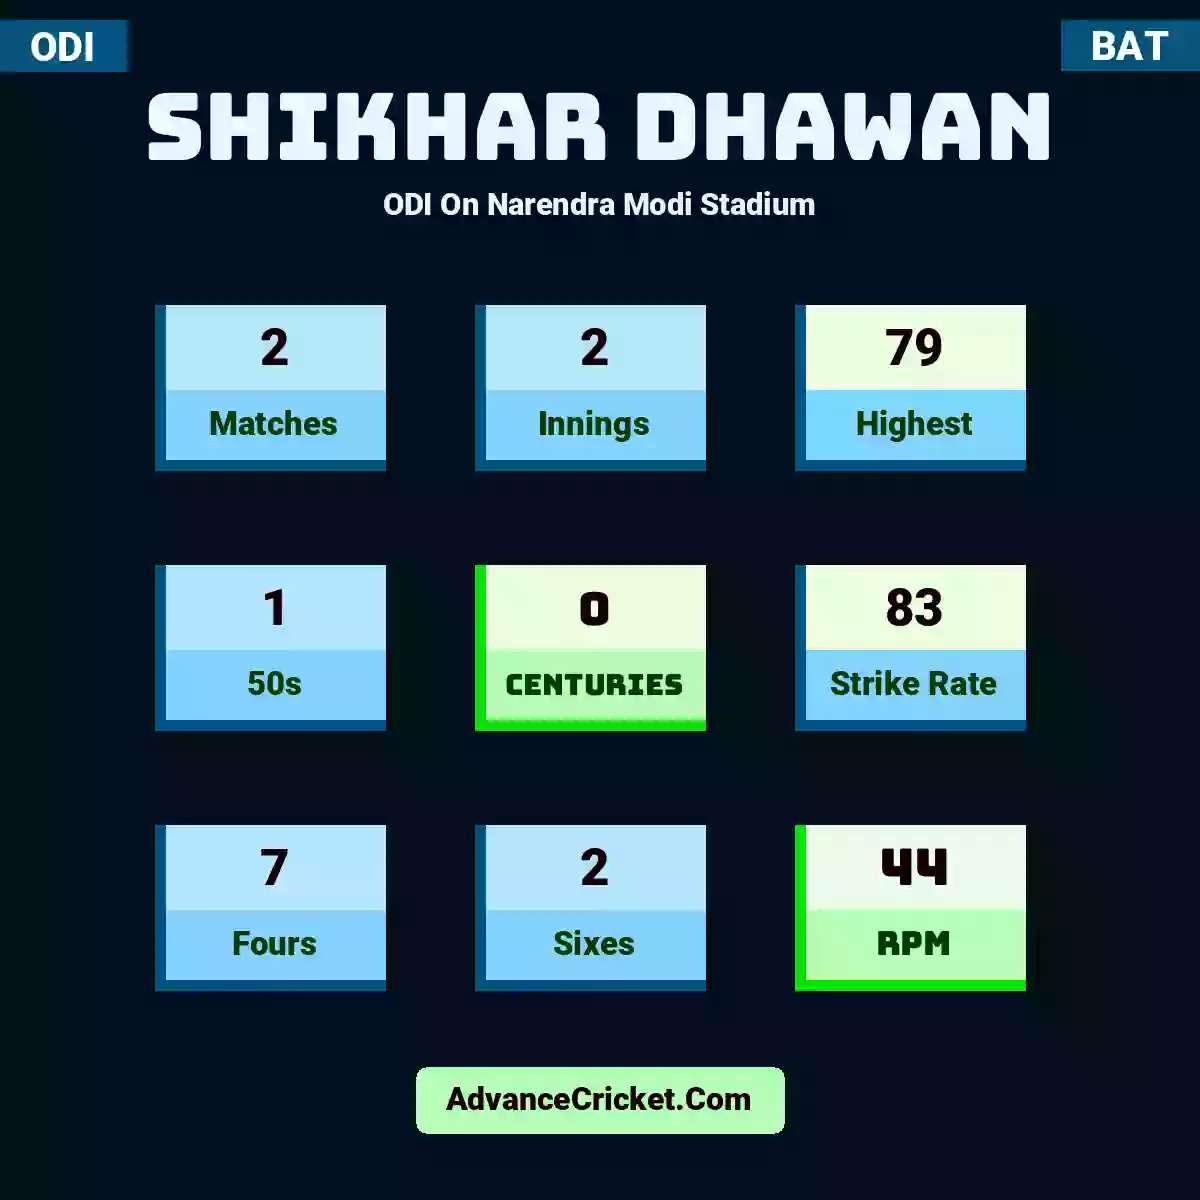 Shikhar Dhawan ODI  On Narendra Modi Stadium, Shikhar Dhawan played 2 matches, scored 79 runs as highest, 1 half-centuries, and 0 centuries, with a strike rate of 83. S.Dhawan hit 7 fours and 2 sixes, with an RPM of 44.